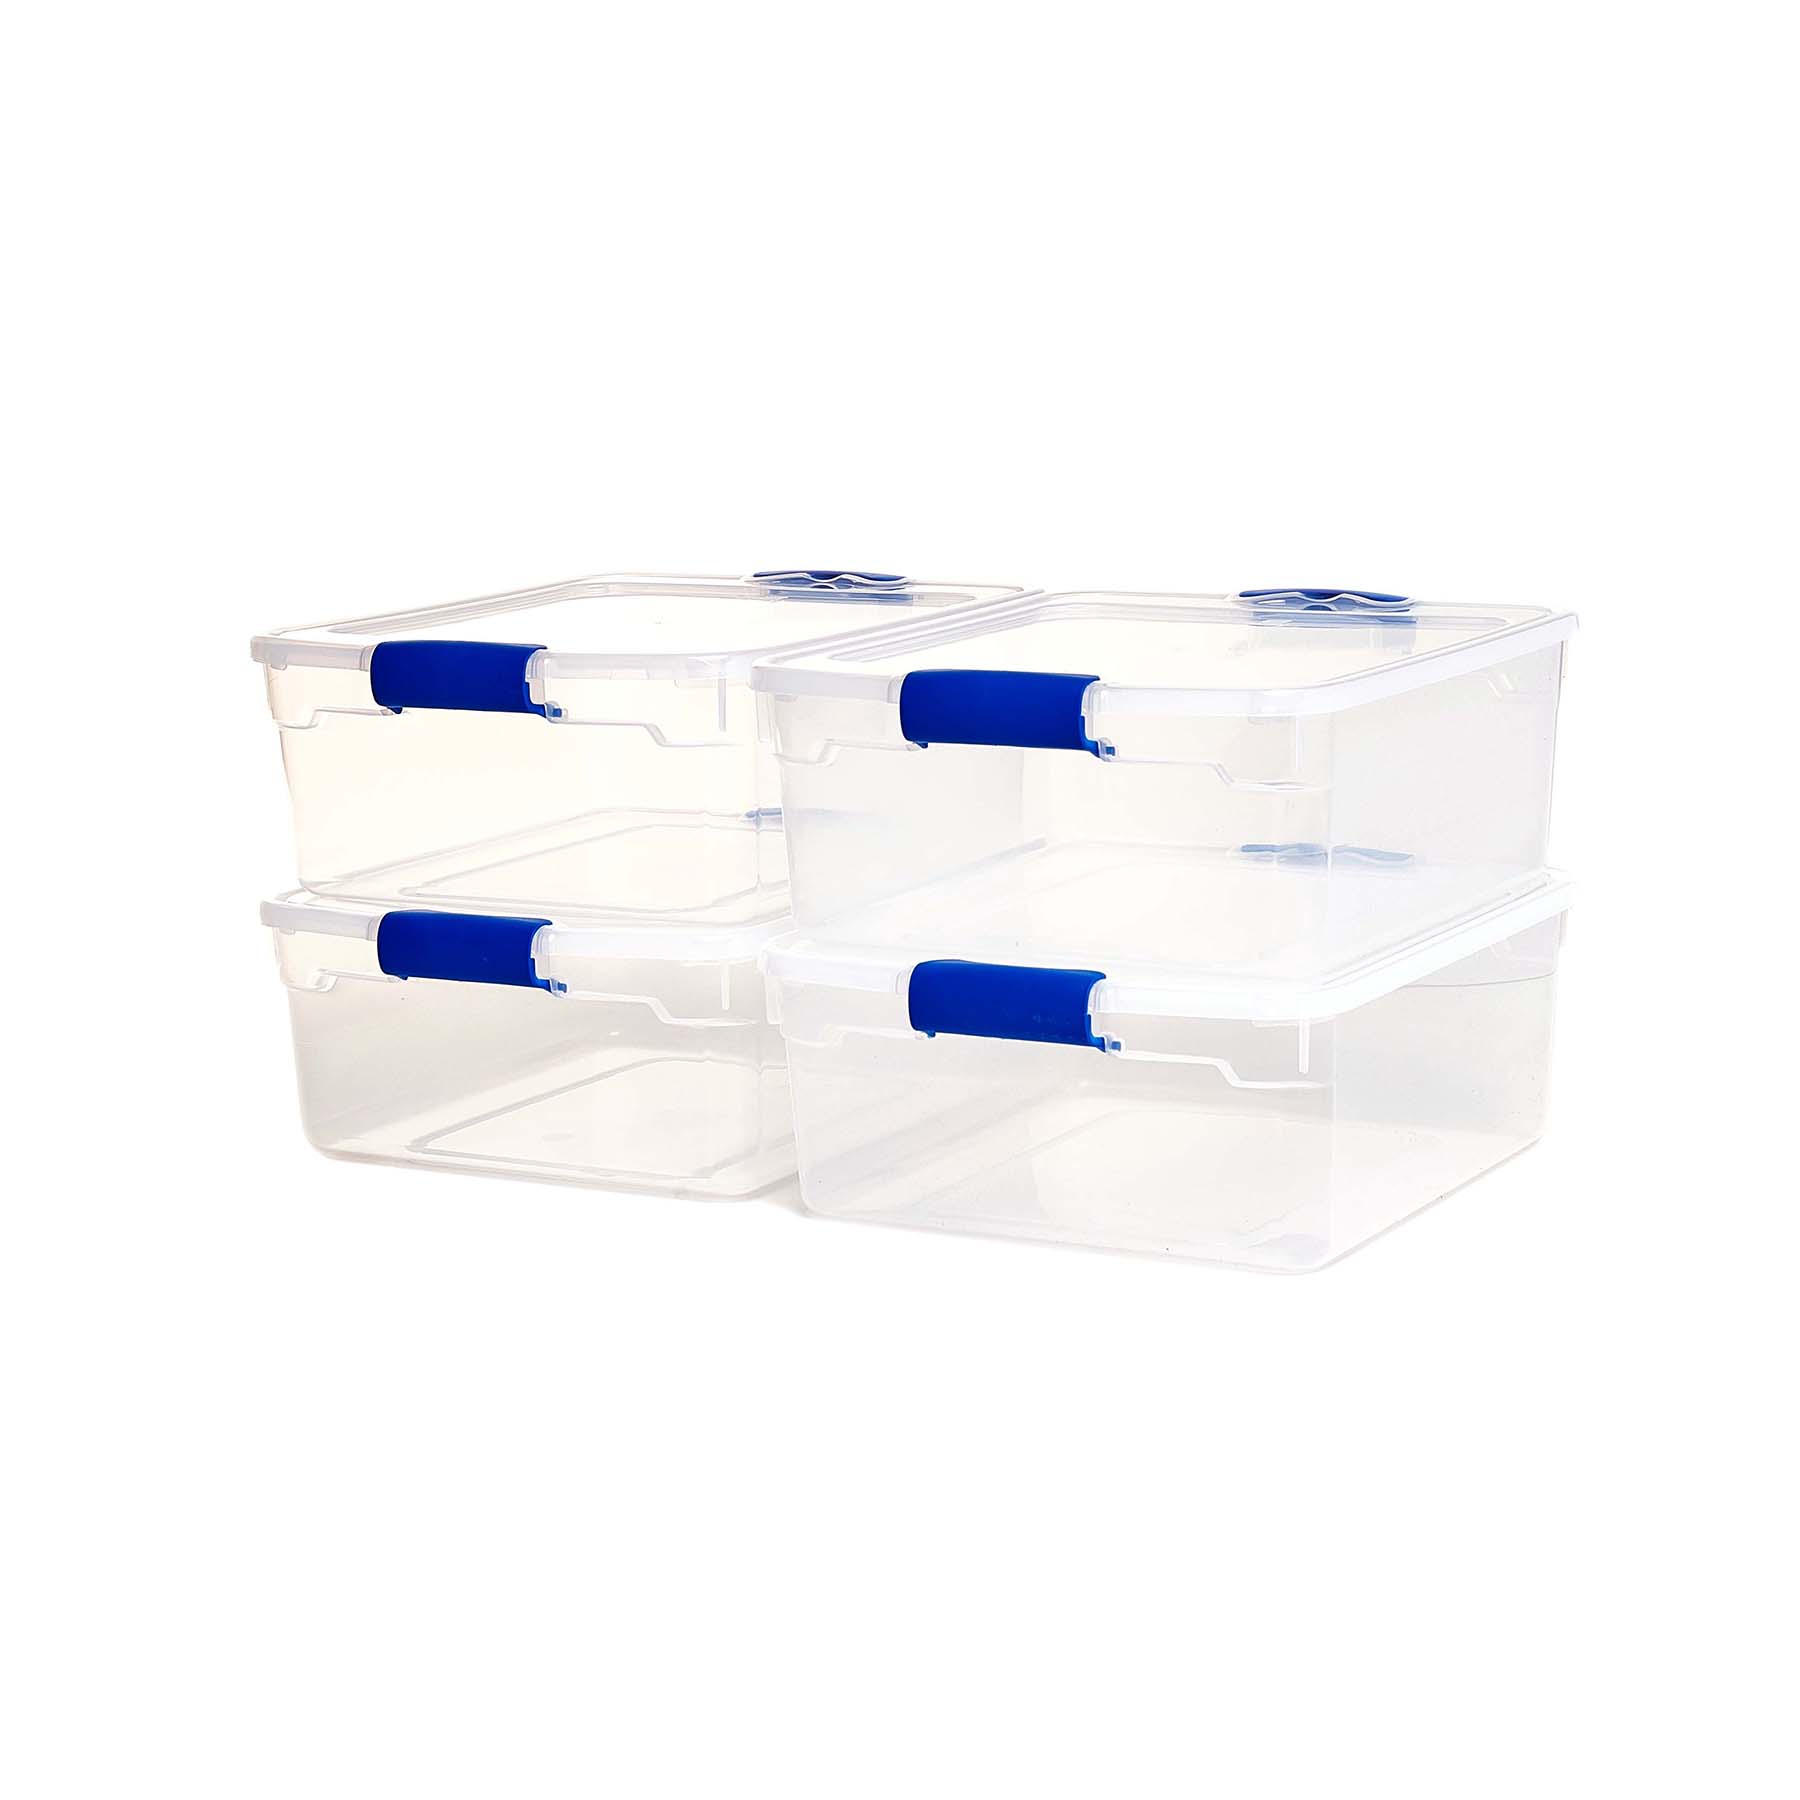 Homz 15.5 Qt Plastic Stackable Storage Containers with Lids, Clear (4 Pack) - image 2 of 7